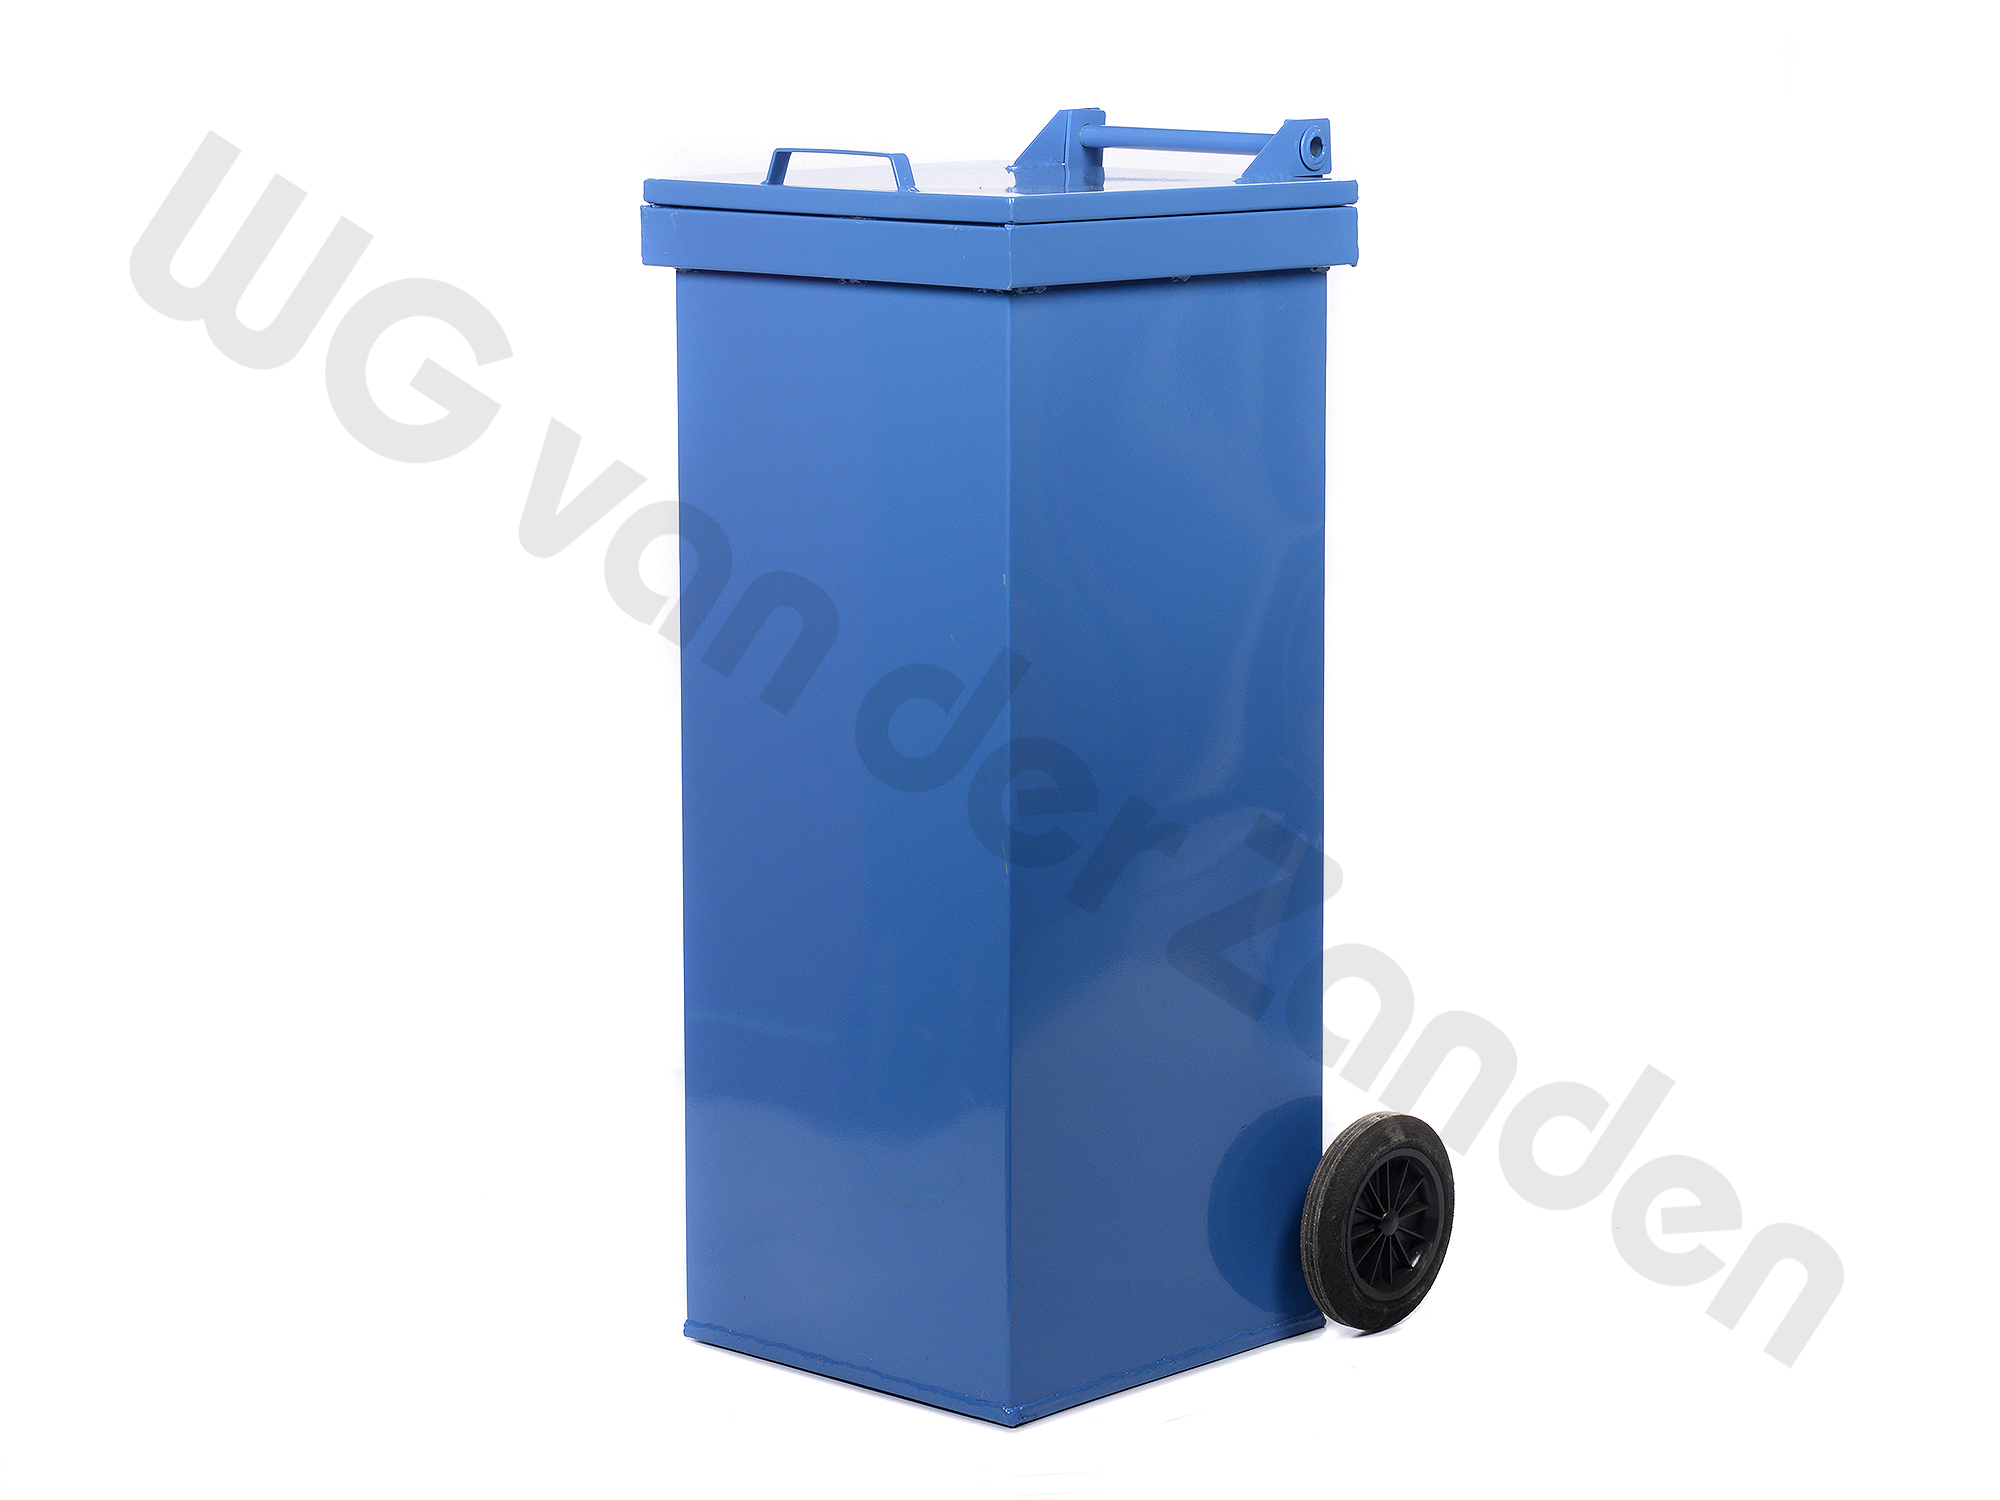 440075 AFVALCONTAINER 240 LTR METAAL M/WIEL BLAUW